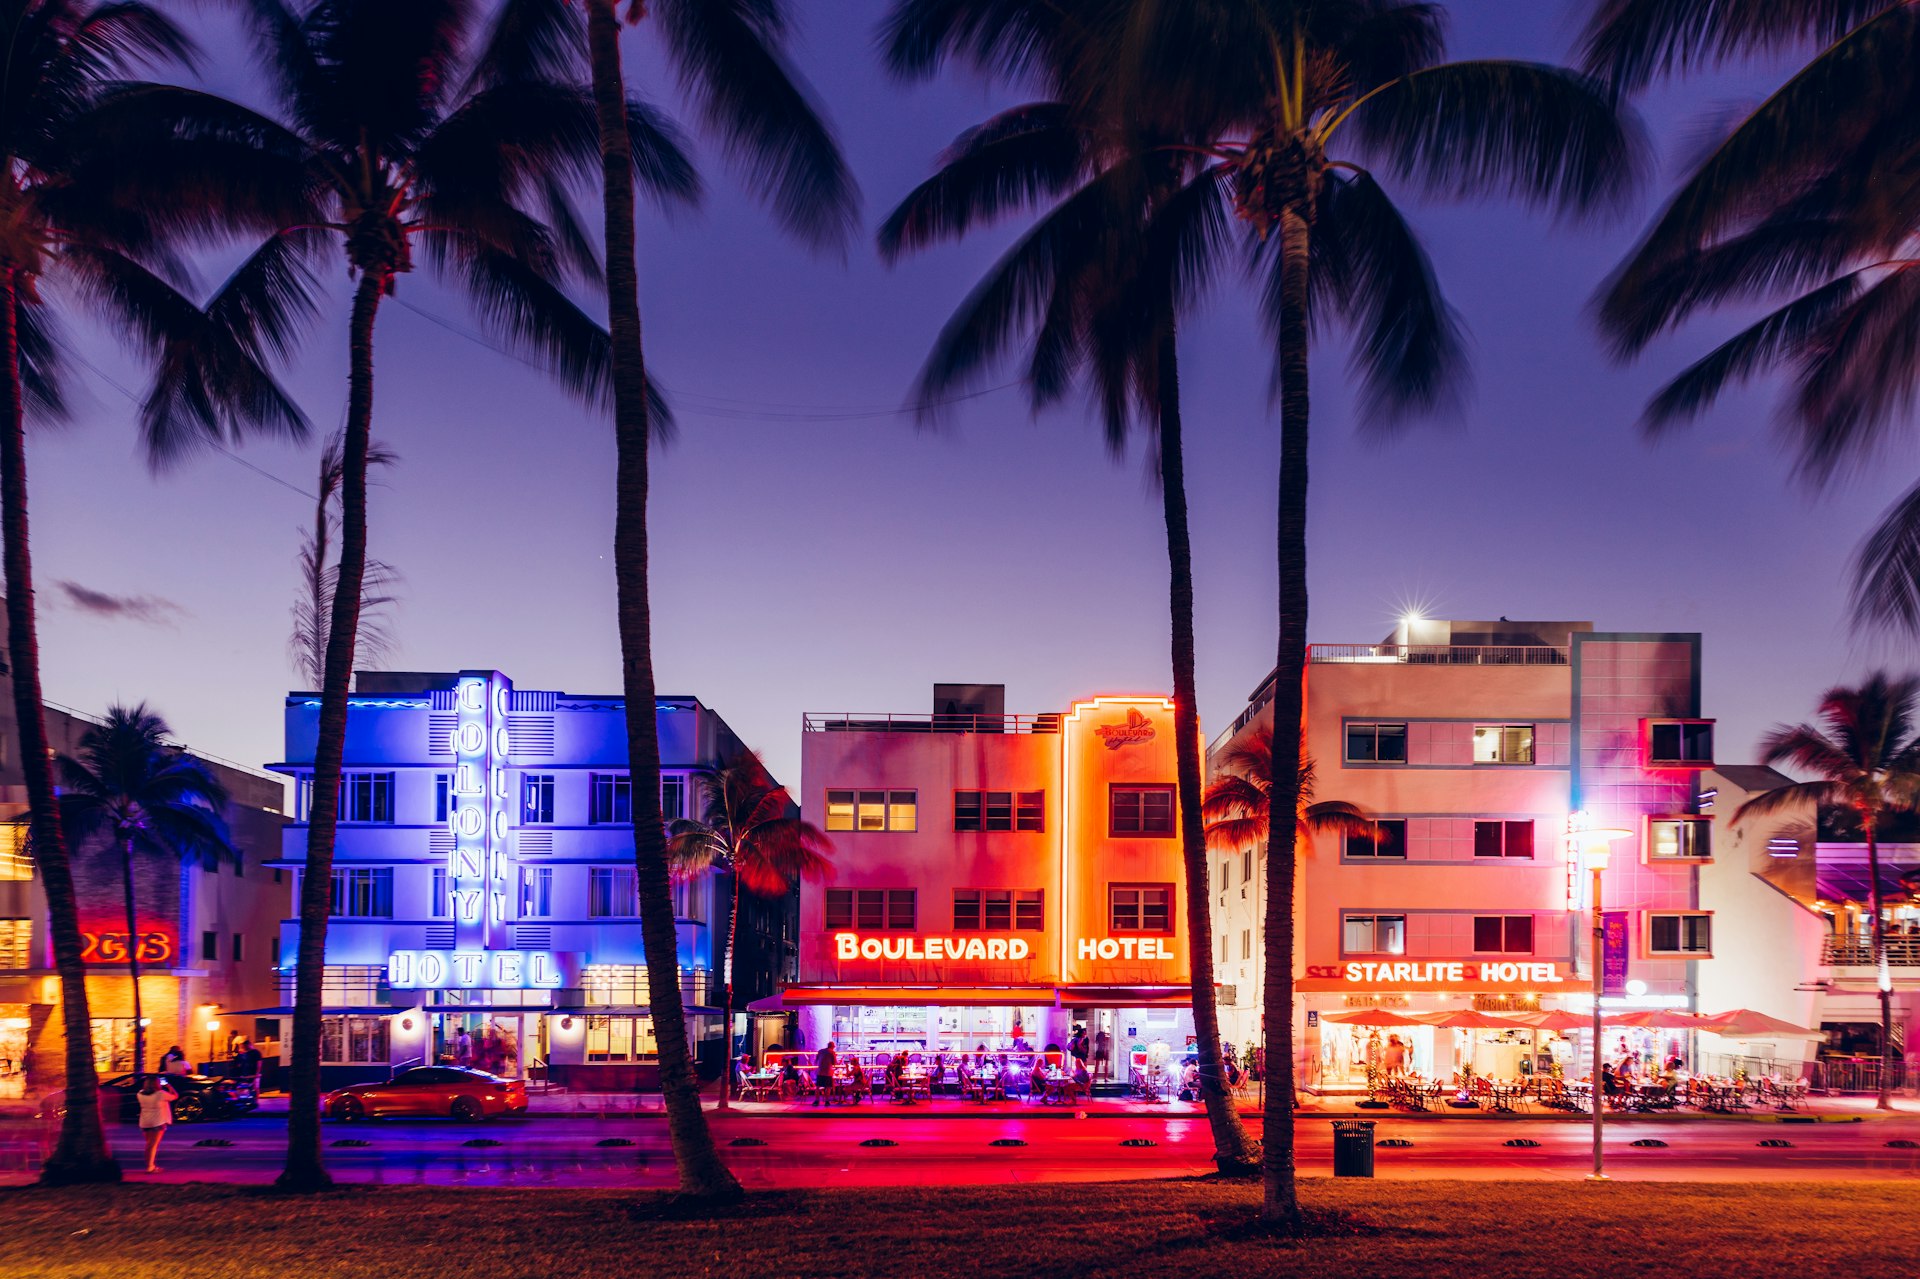 Buildings illuminated by neon lights framed by palm trees on Ocean Drive, South Beach, Miami Beach, Florida, USA